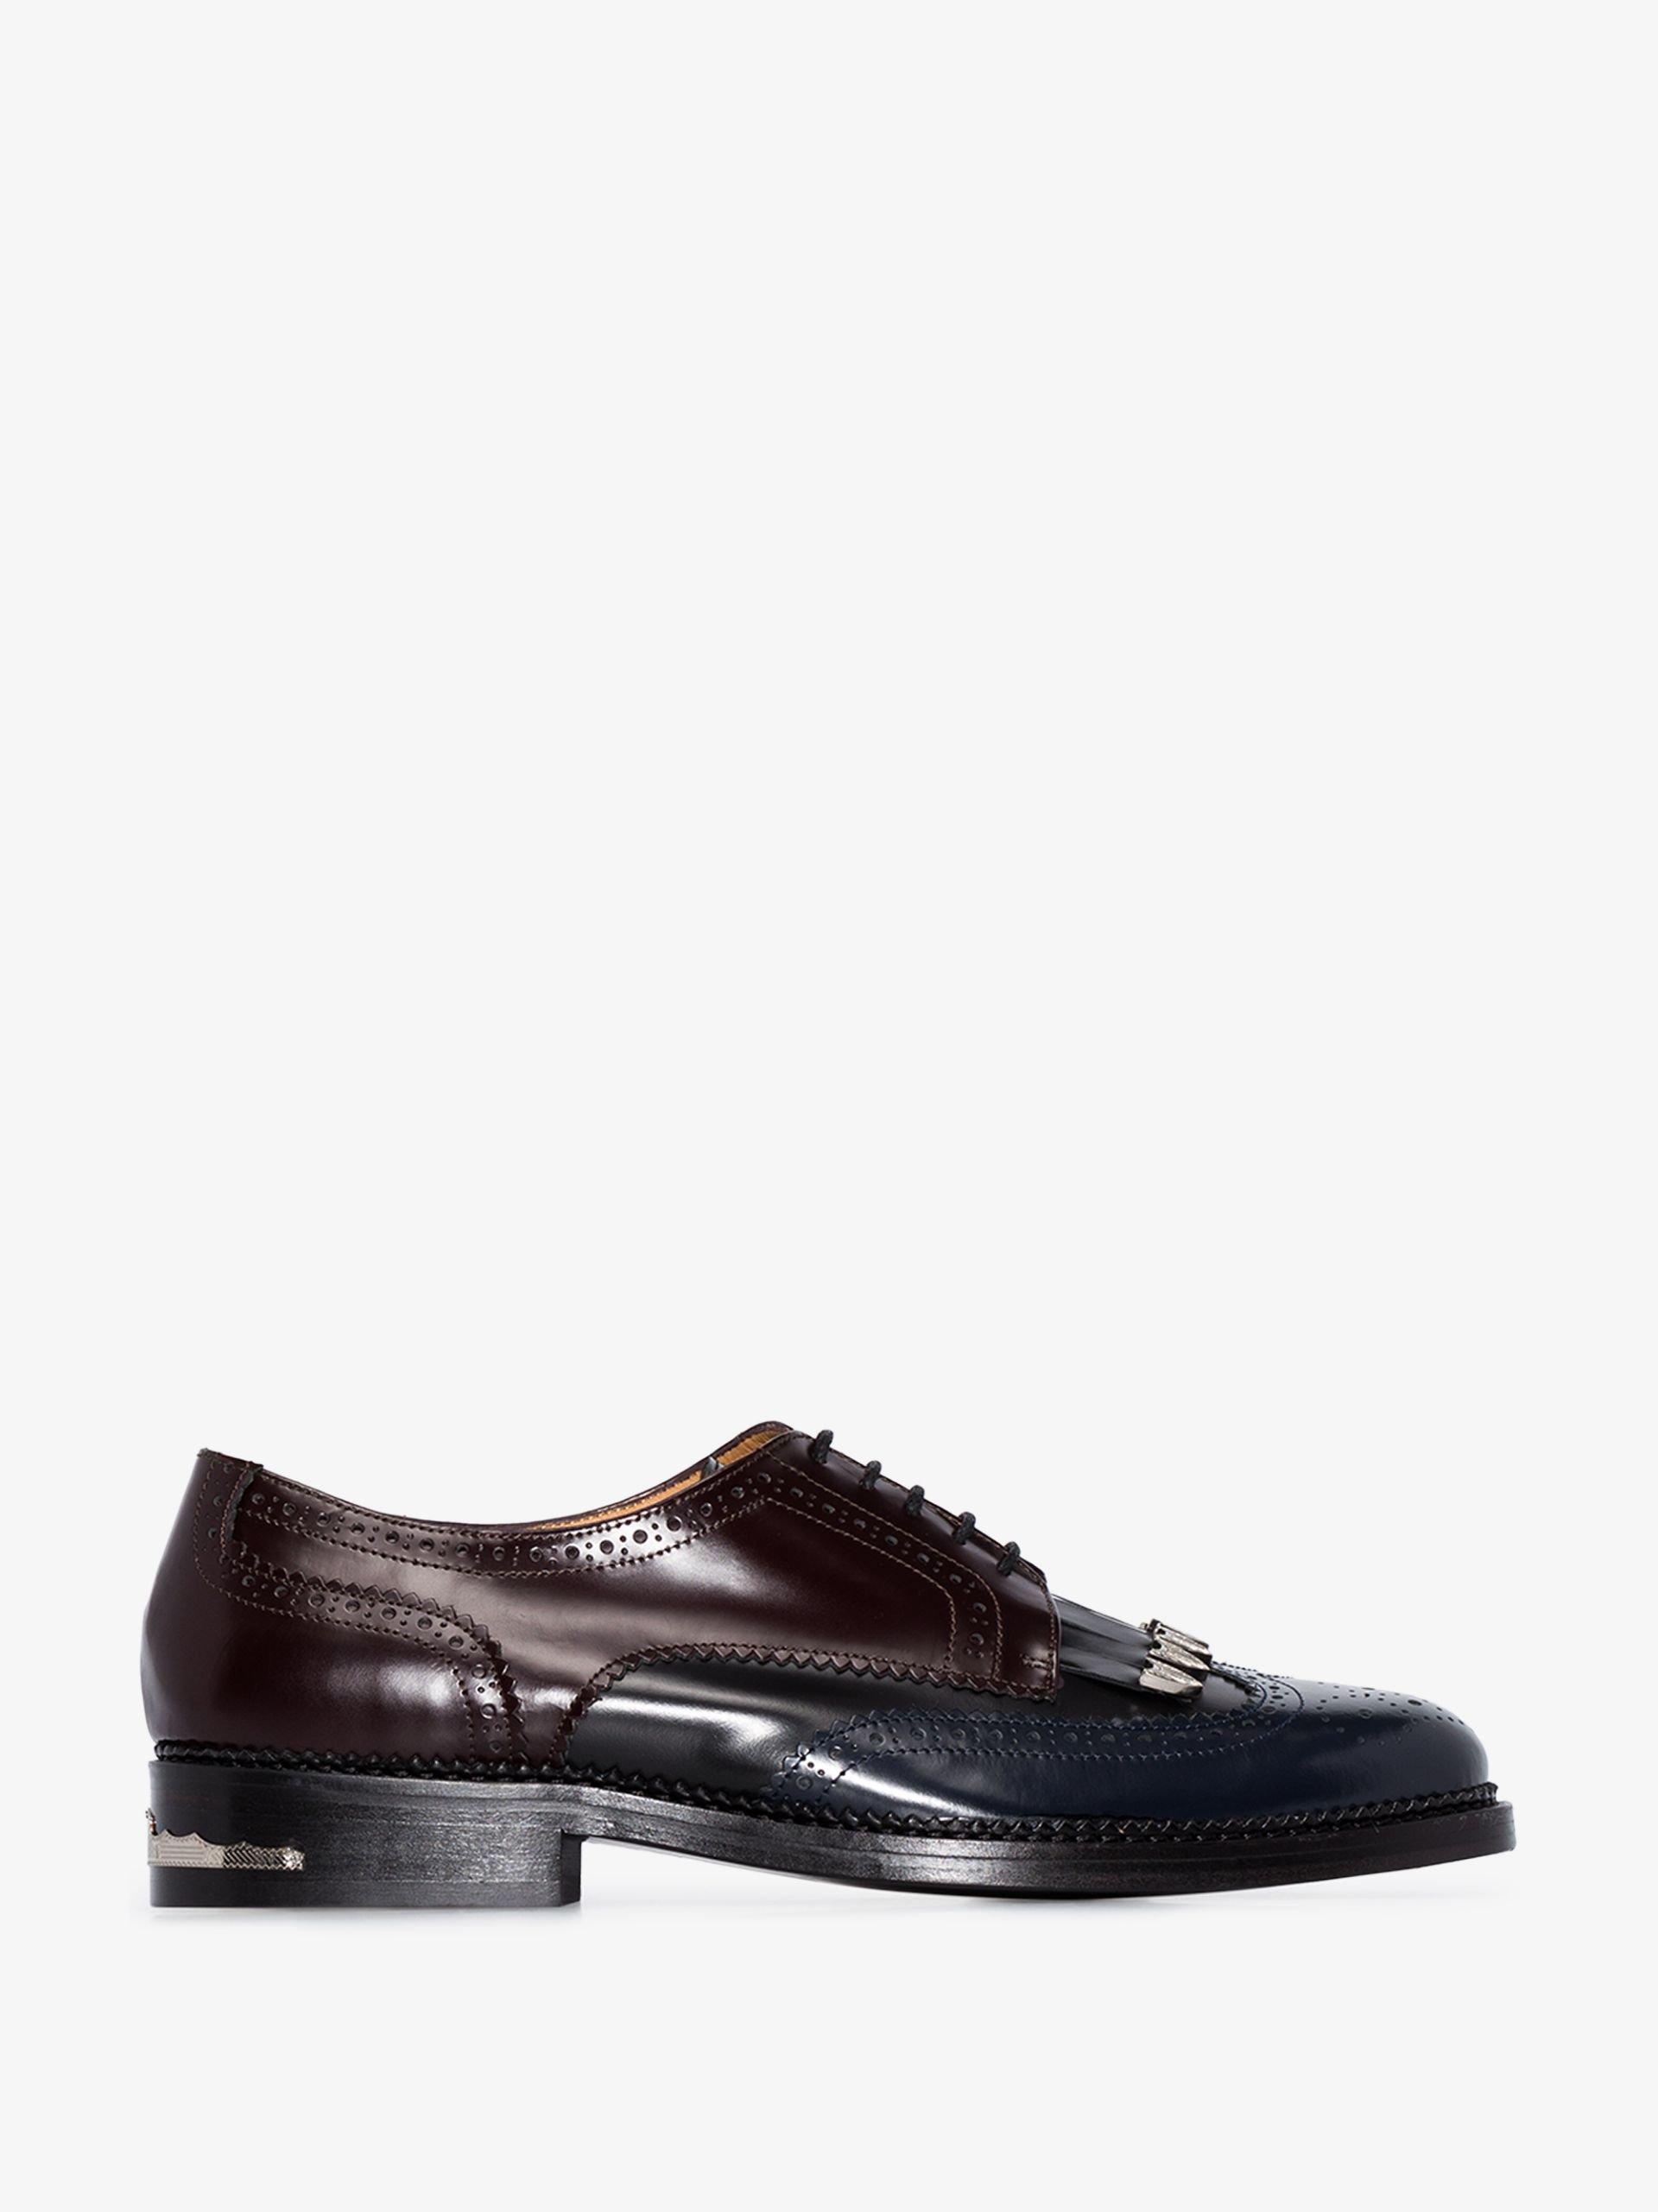 Toga Virilis And Red Tassel Leather Brogues - Men's - Calf Leather